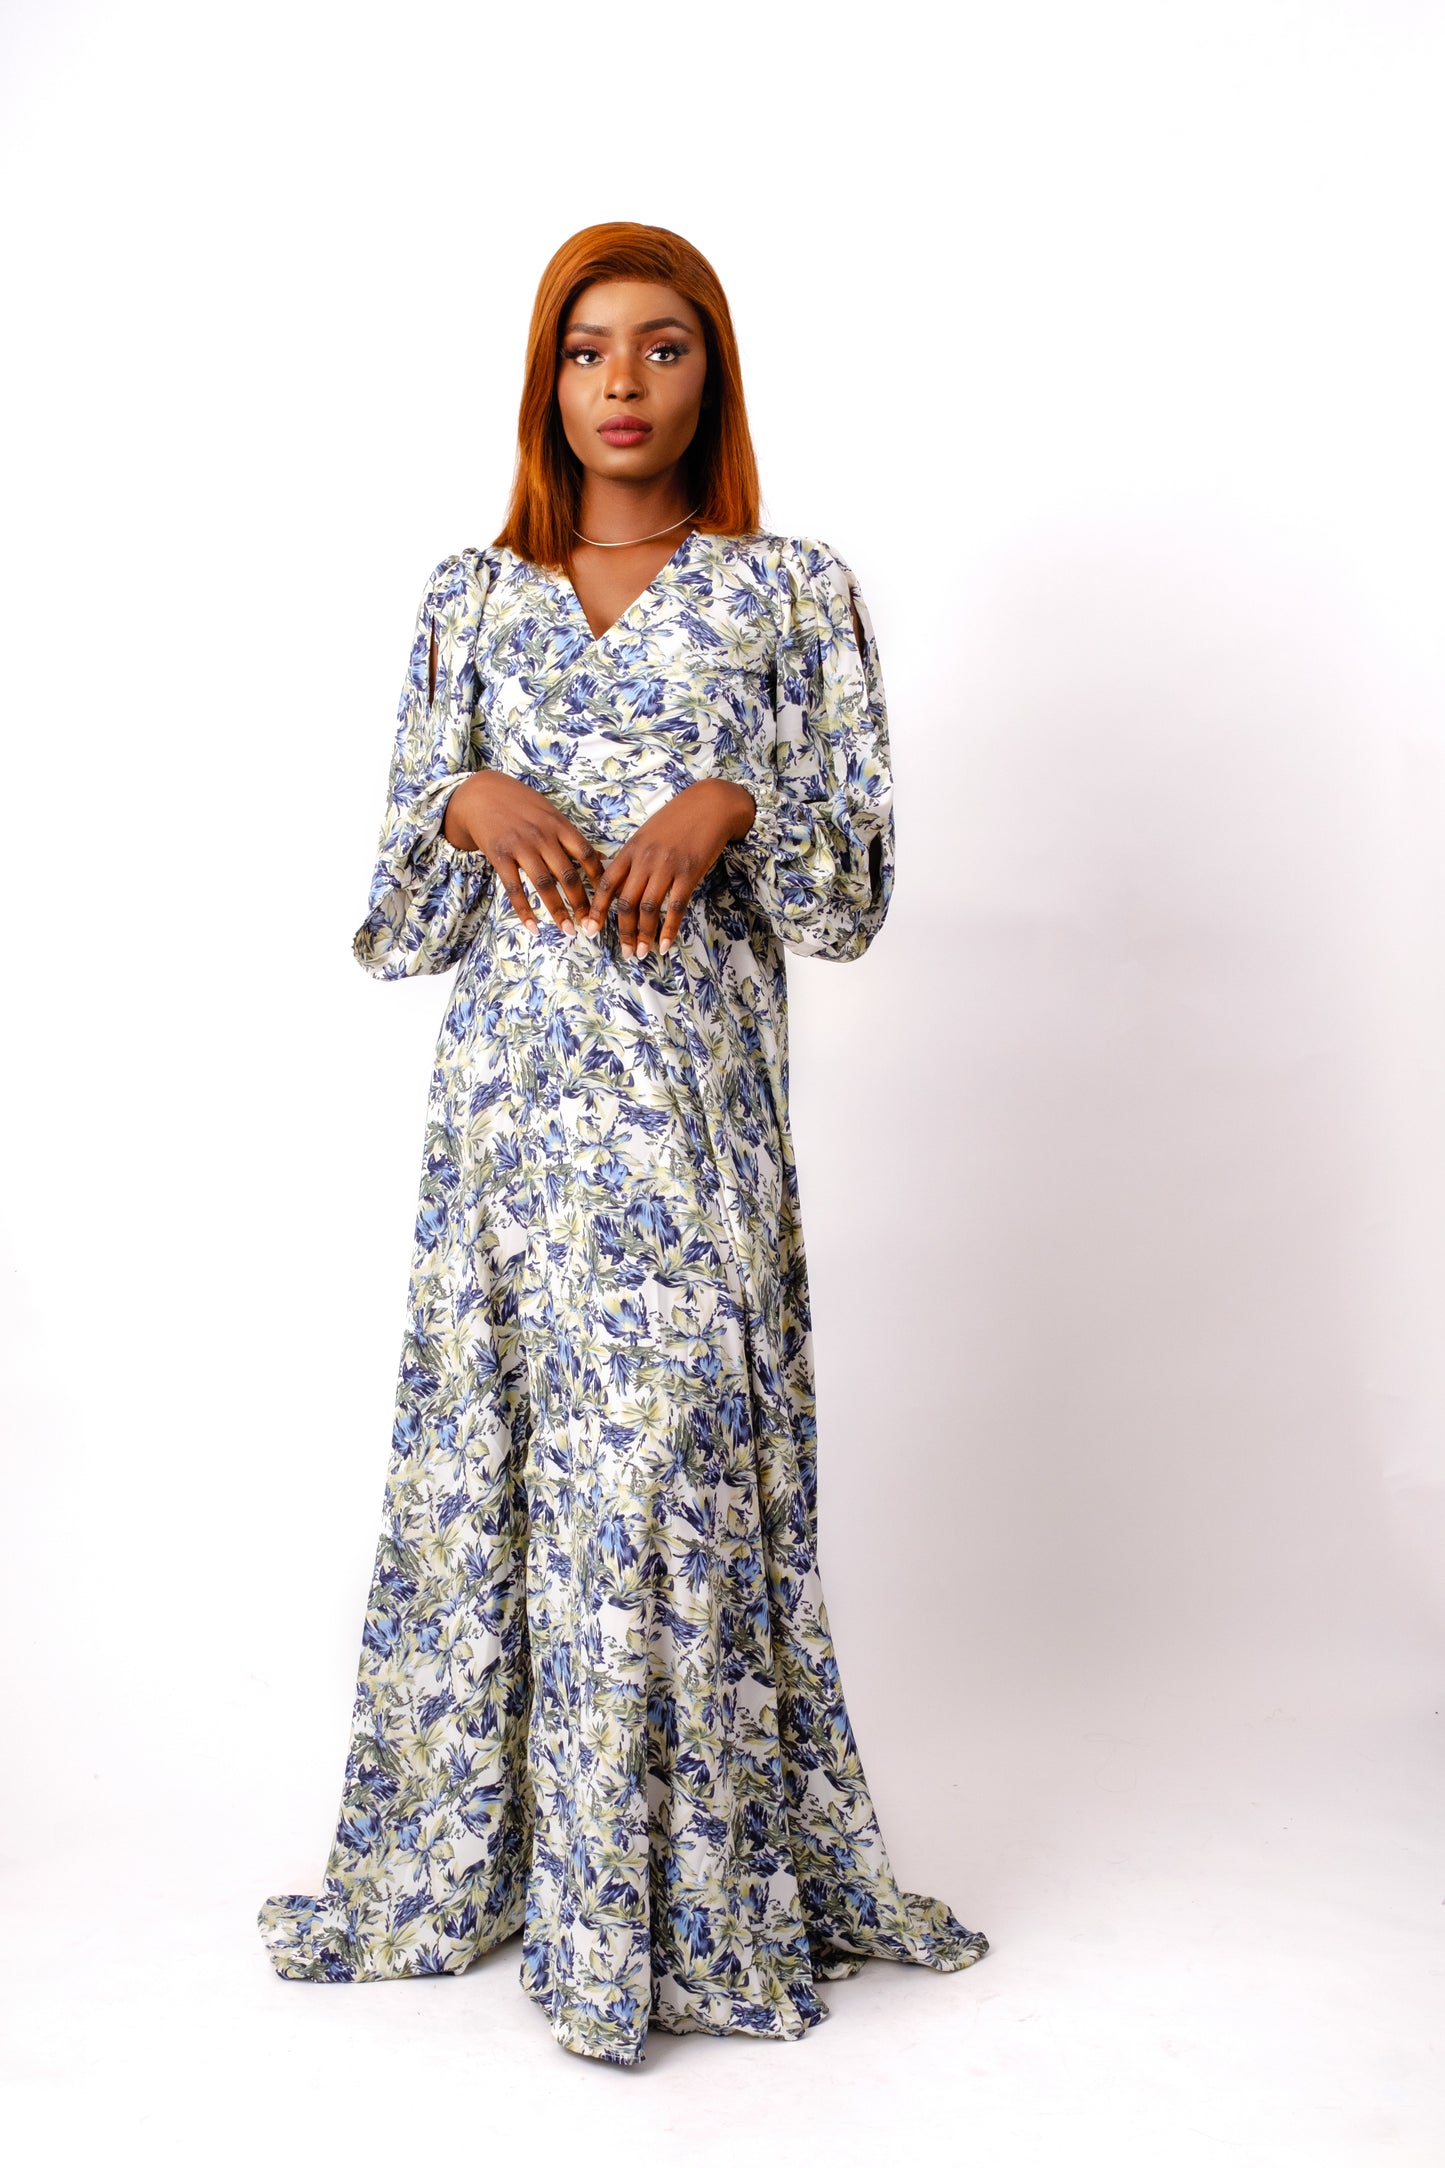 Blue chiffon floral long/maxi wrap dress featuring a V-neckline and long split sleeves.